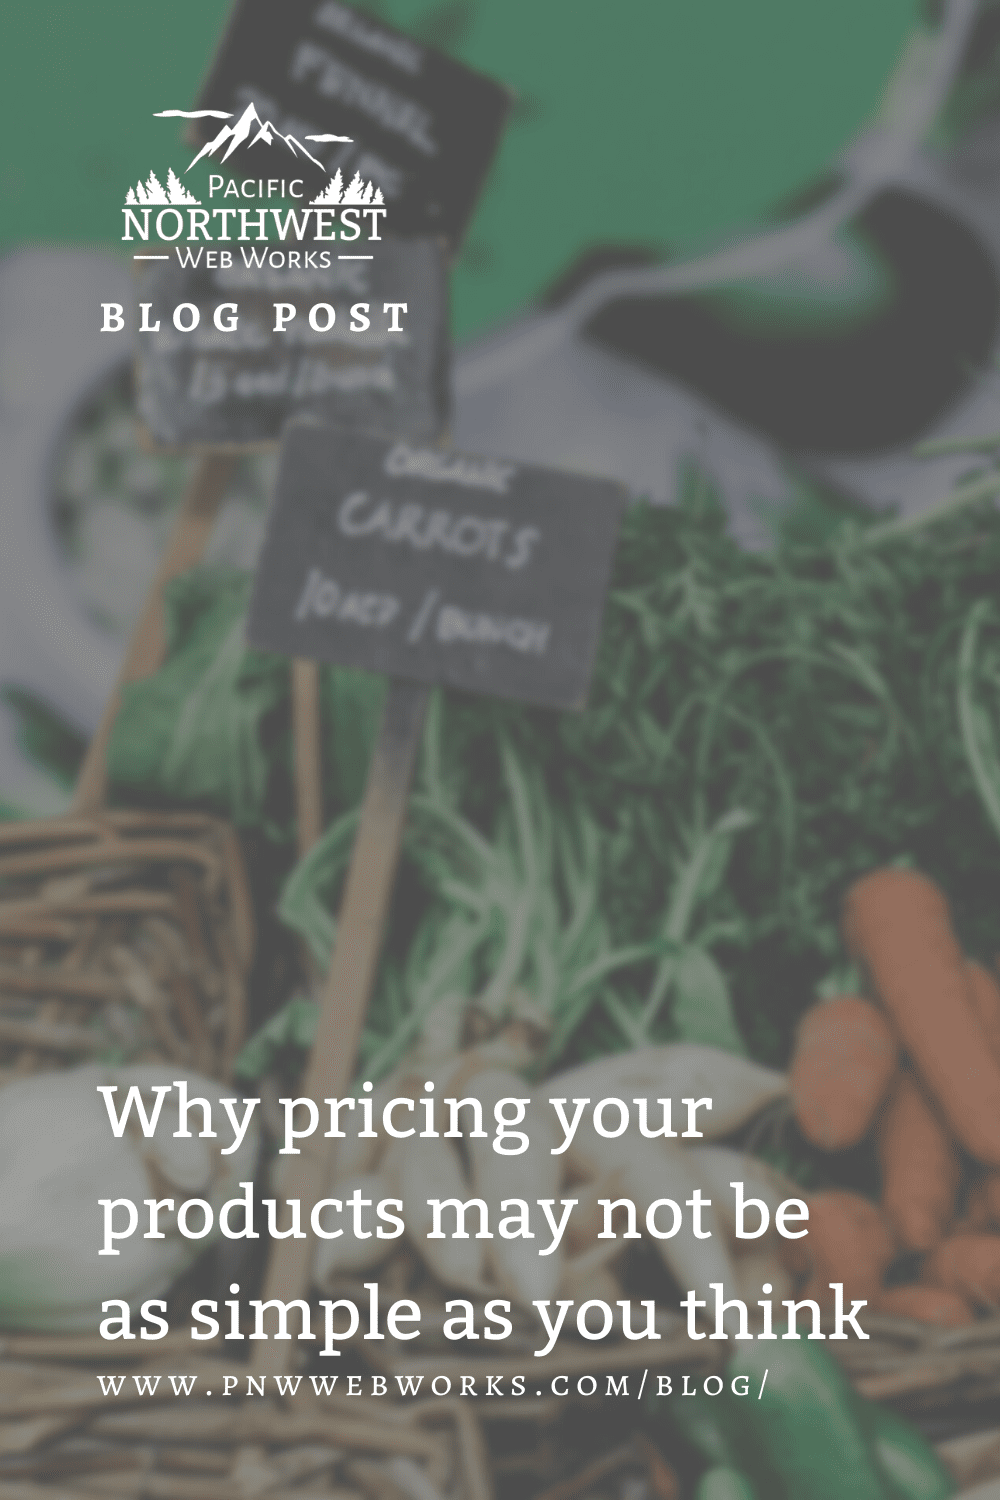 Why pricing your products may not be as simple as you think